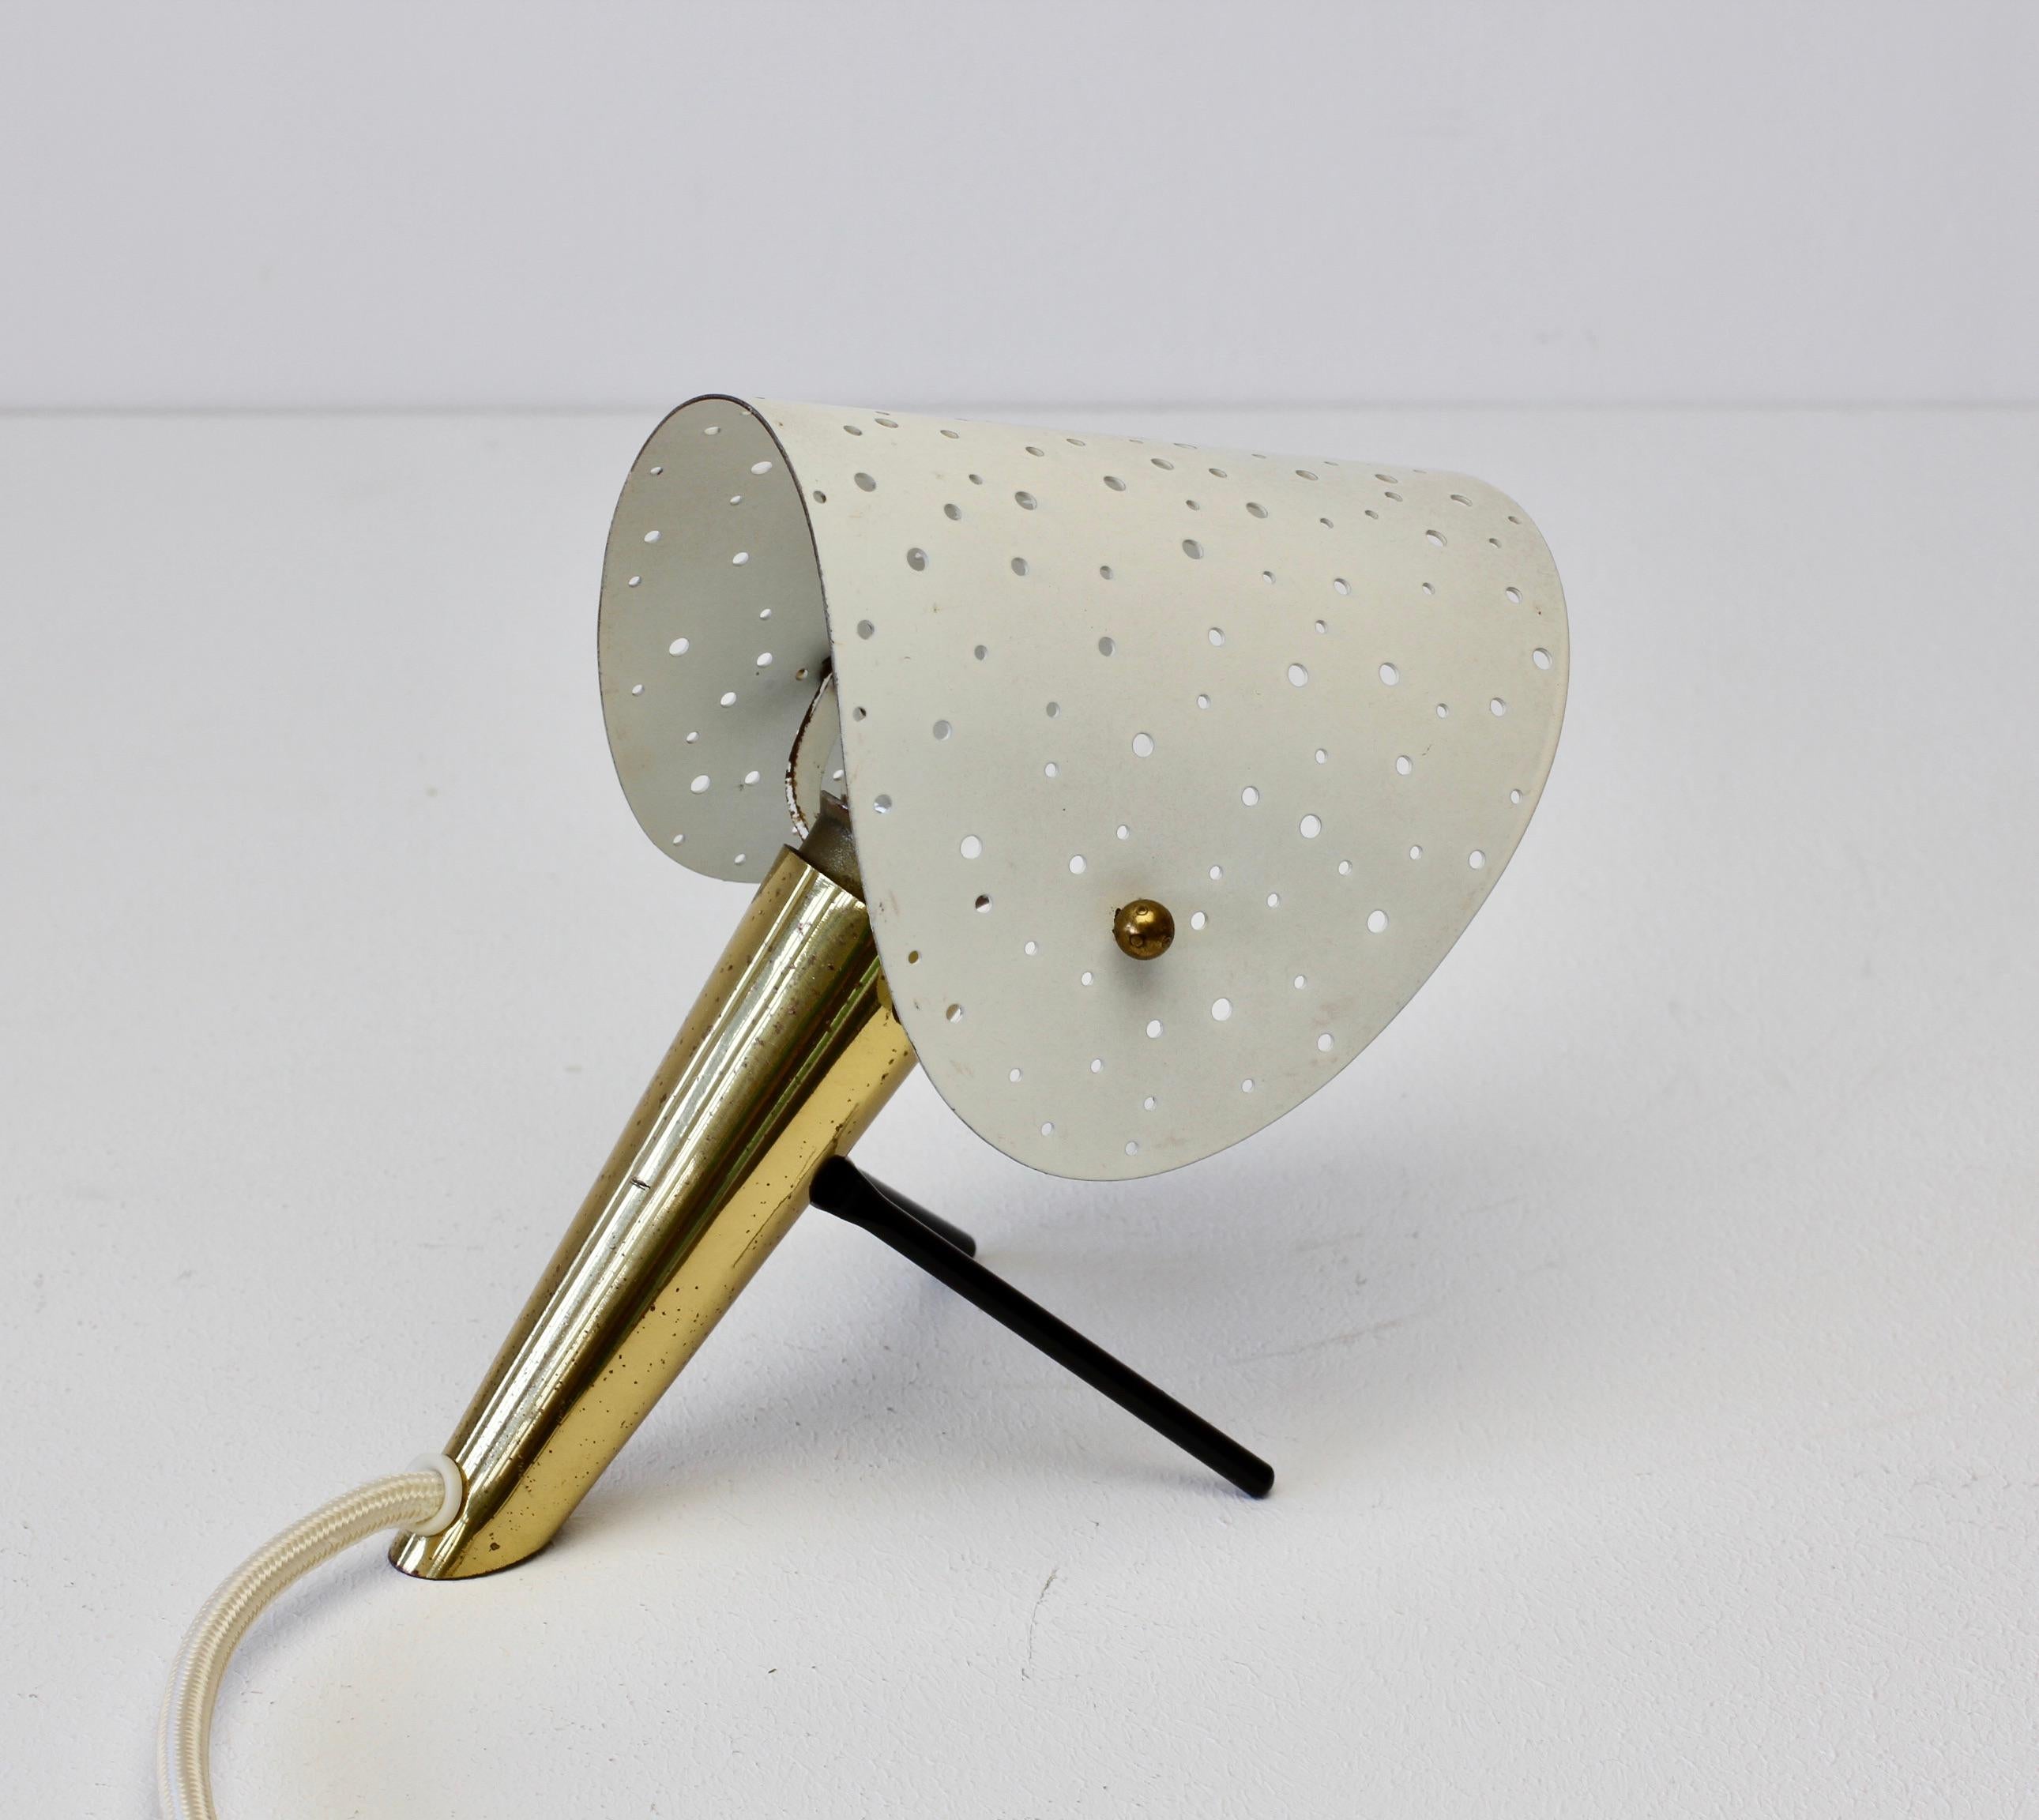 Painted 1950s Midcentury Perforated Metal & Brass Table Lamp or Desk Light by Ernst Igl